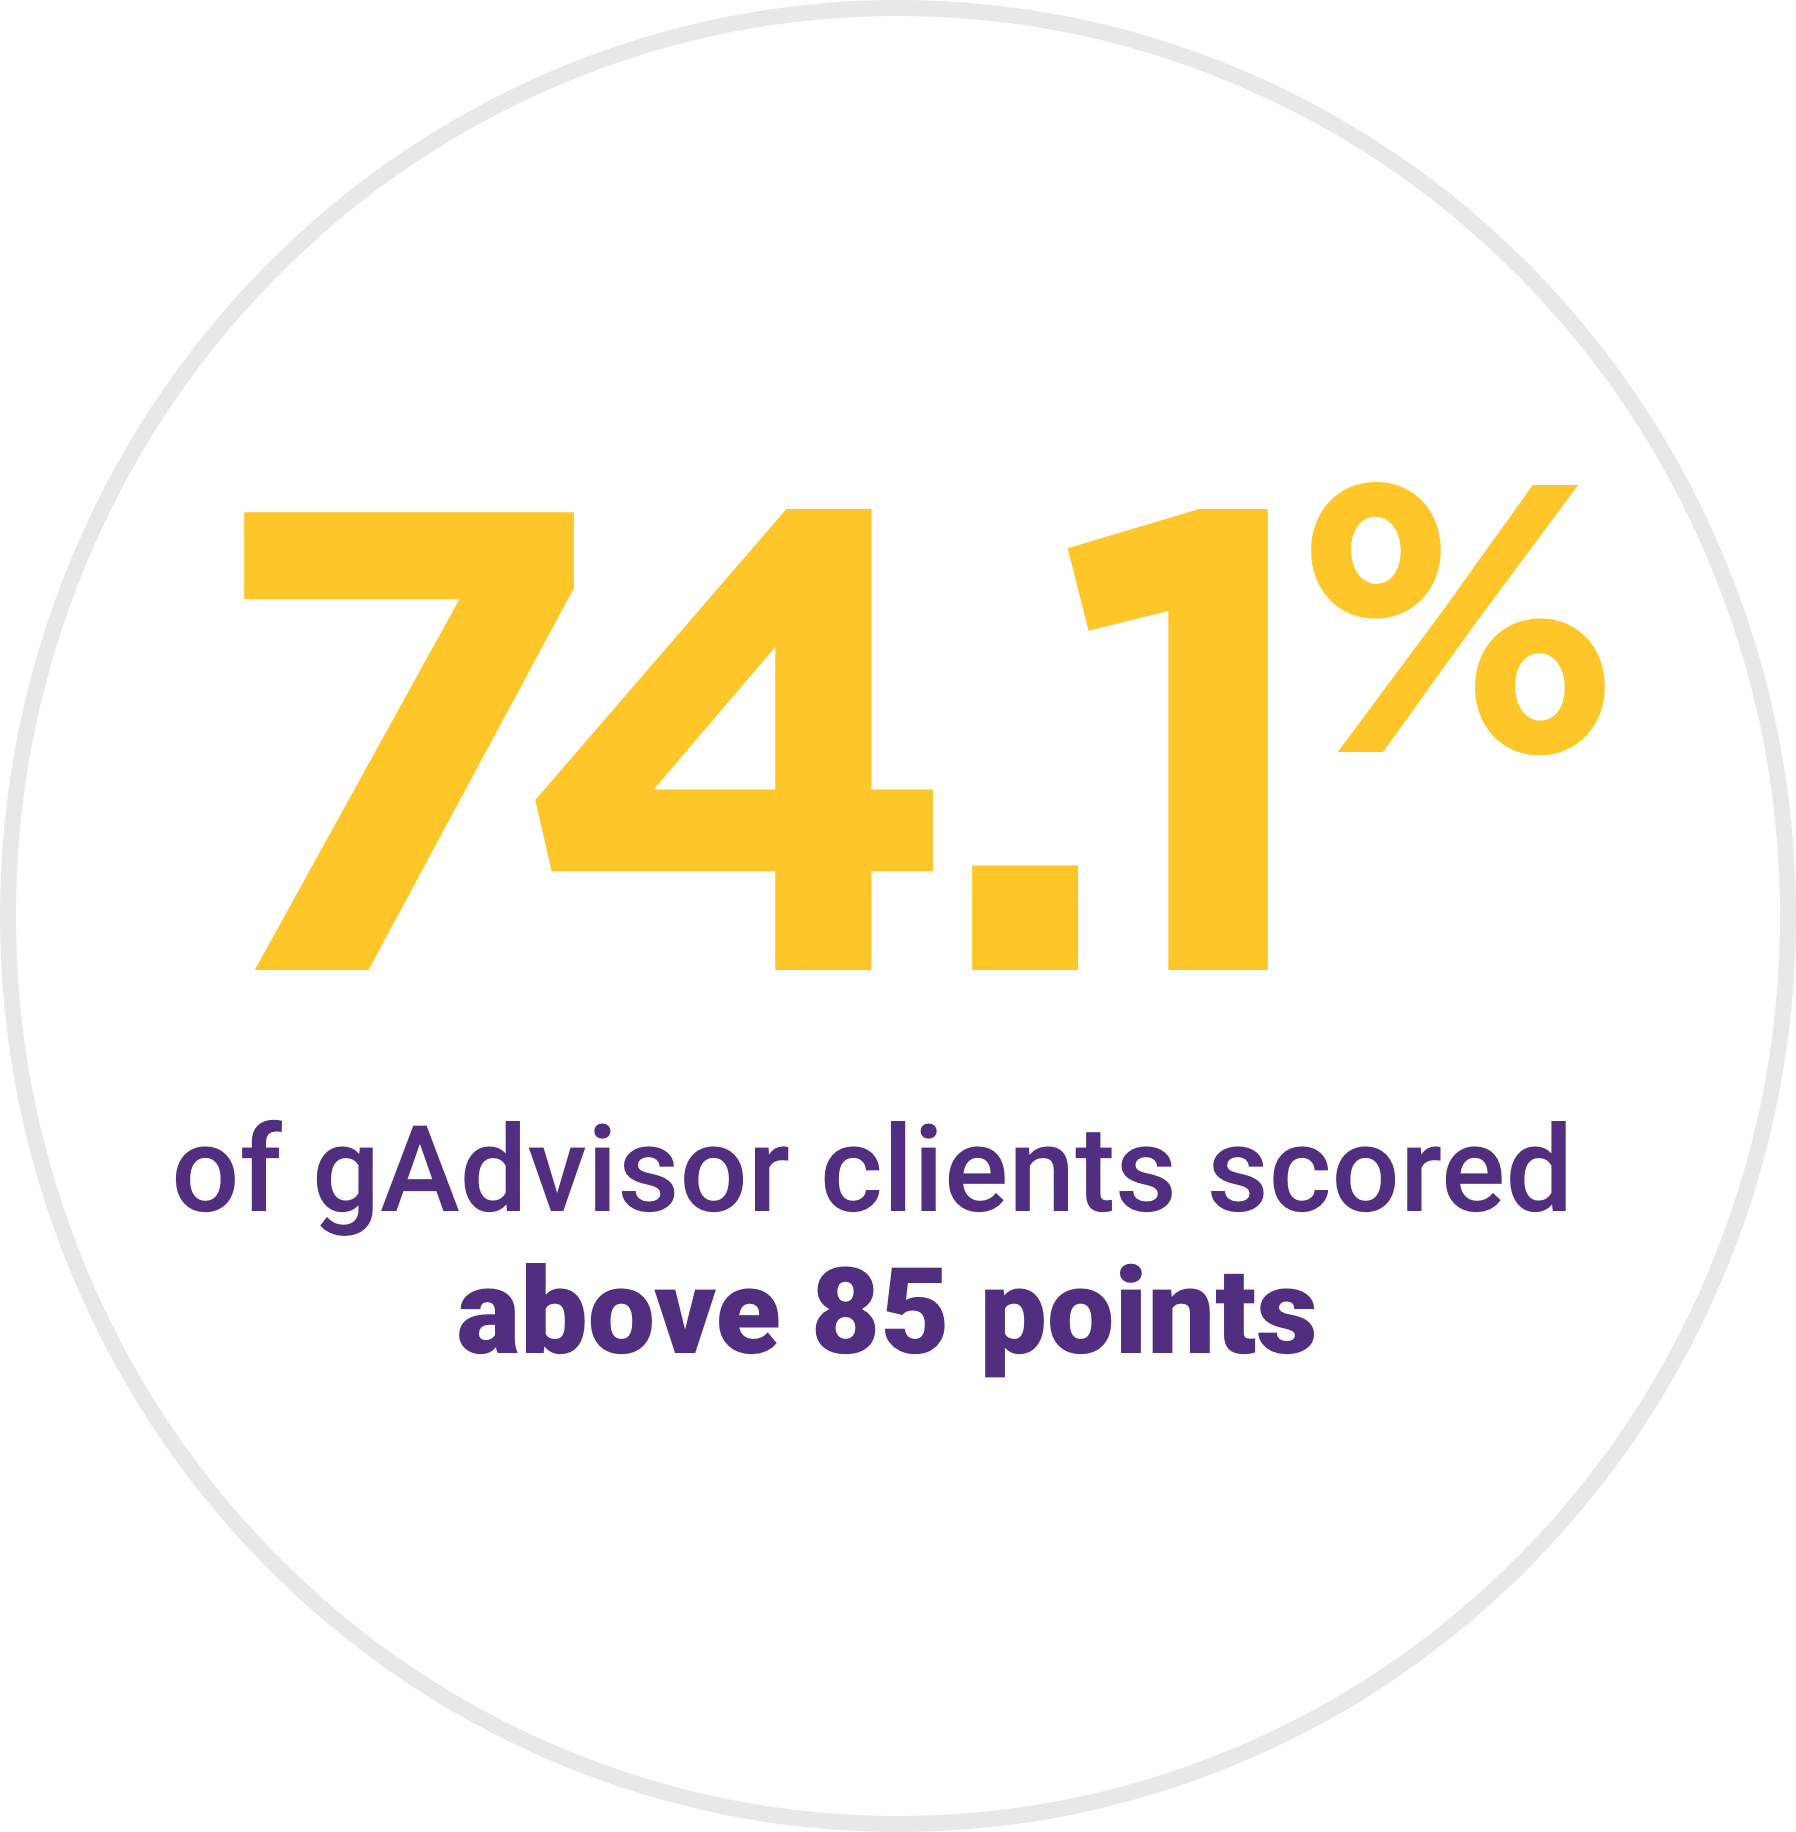 74.1% of gAdvisor clients scored above 85 points